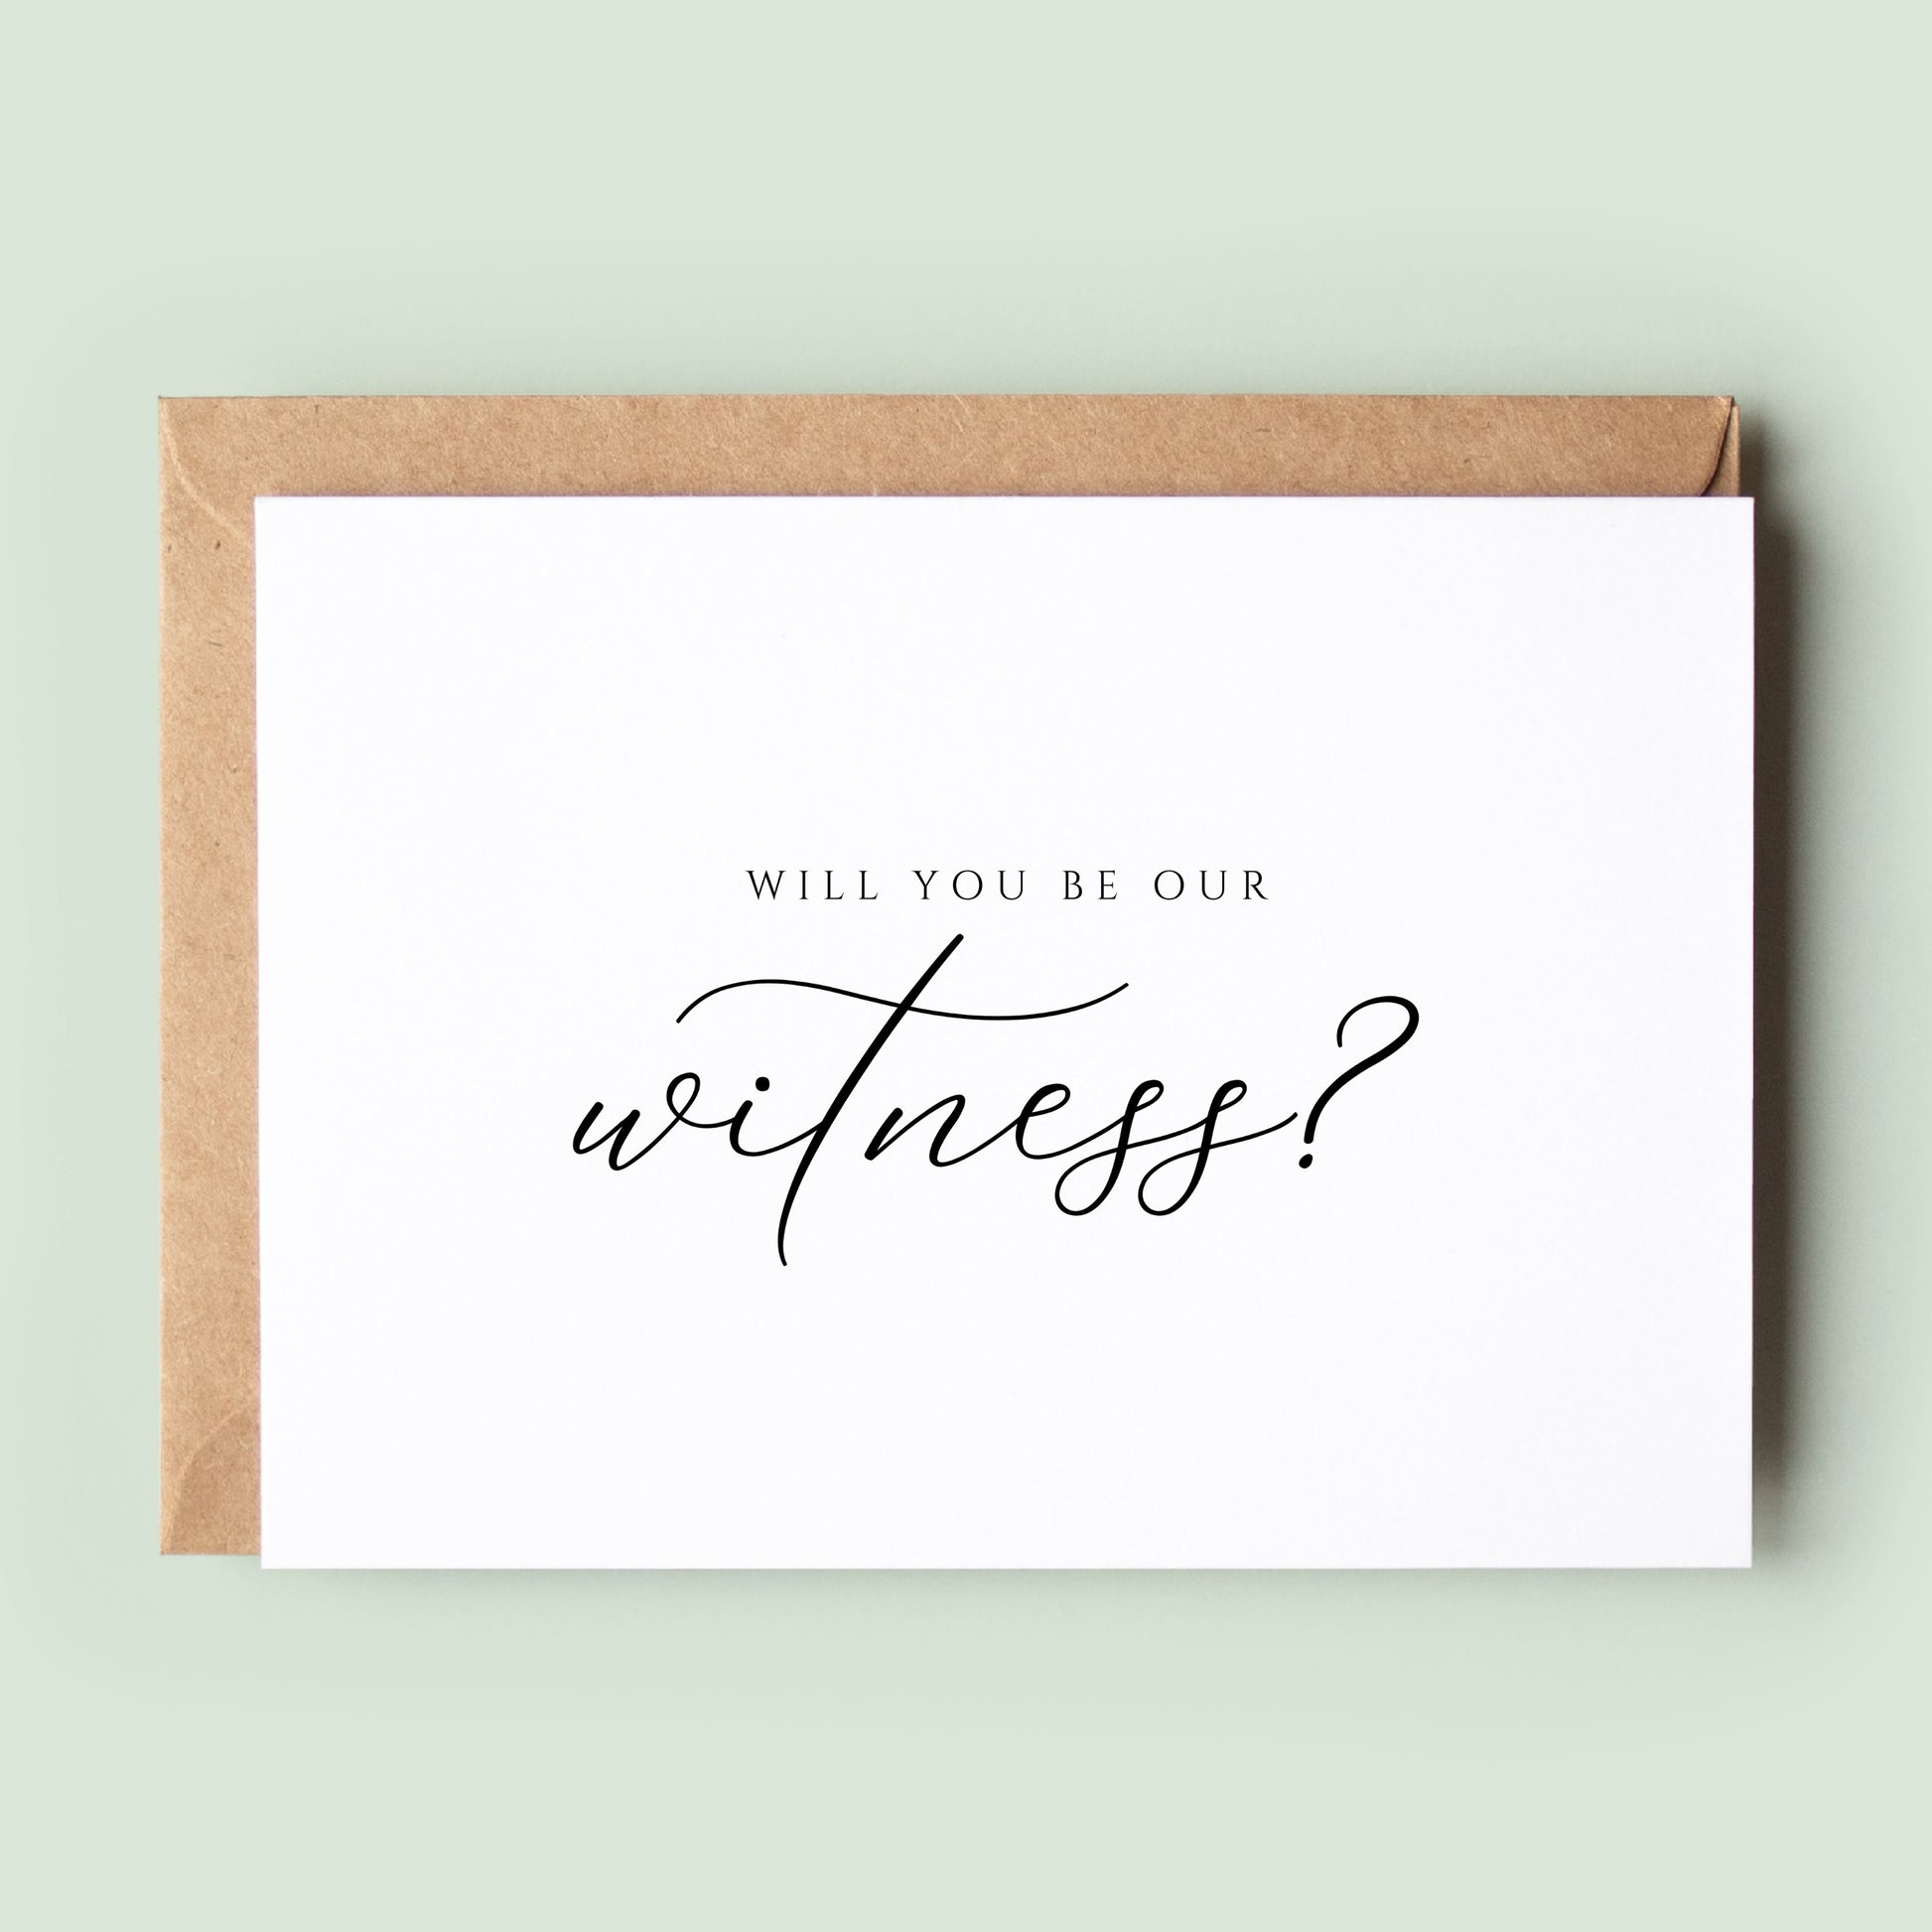 Classic Will You Be Our Witness, Will You Be Our Witness Wedding Card, Card To Witness, Will You Marry Us, Wedding Party Card #096